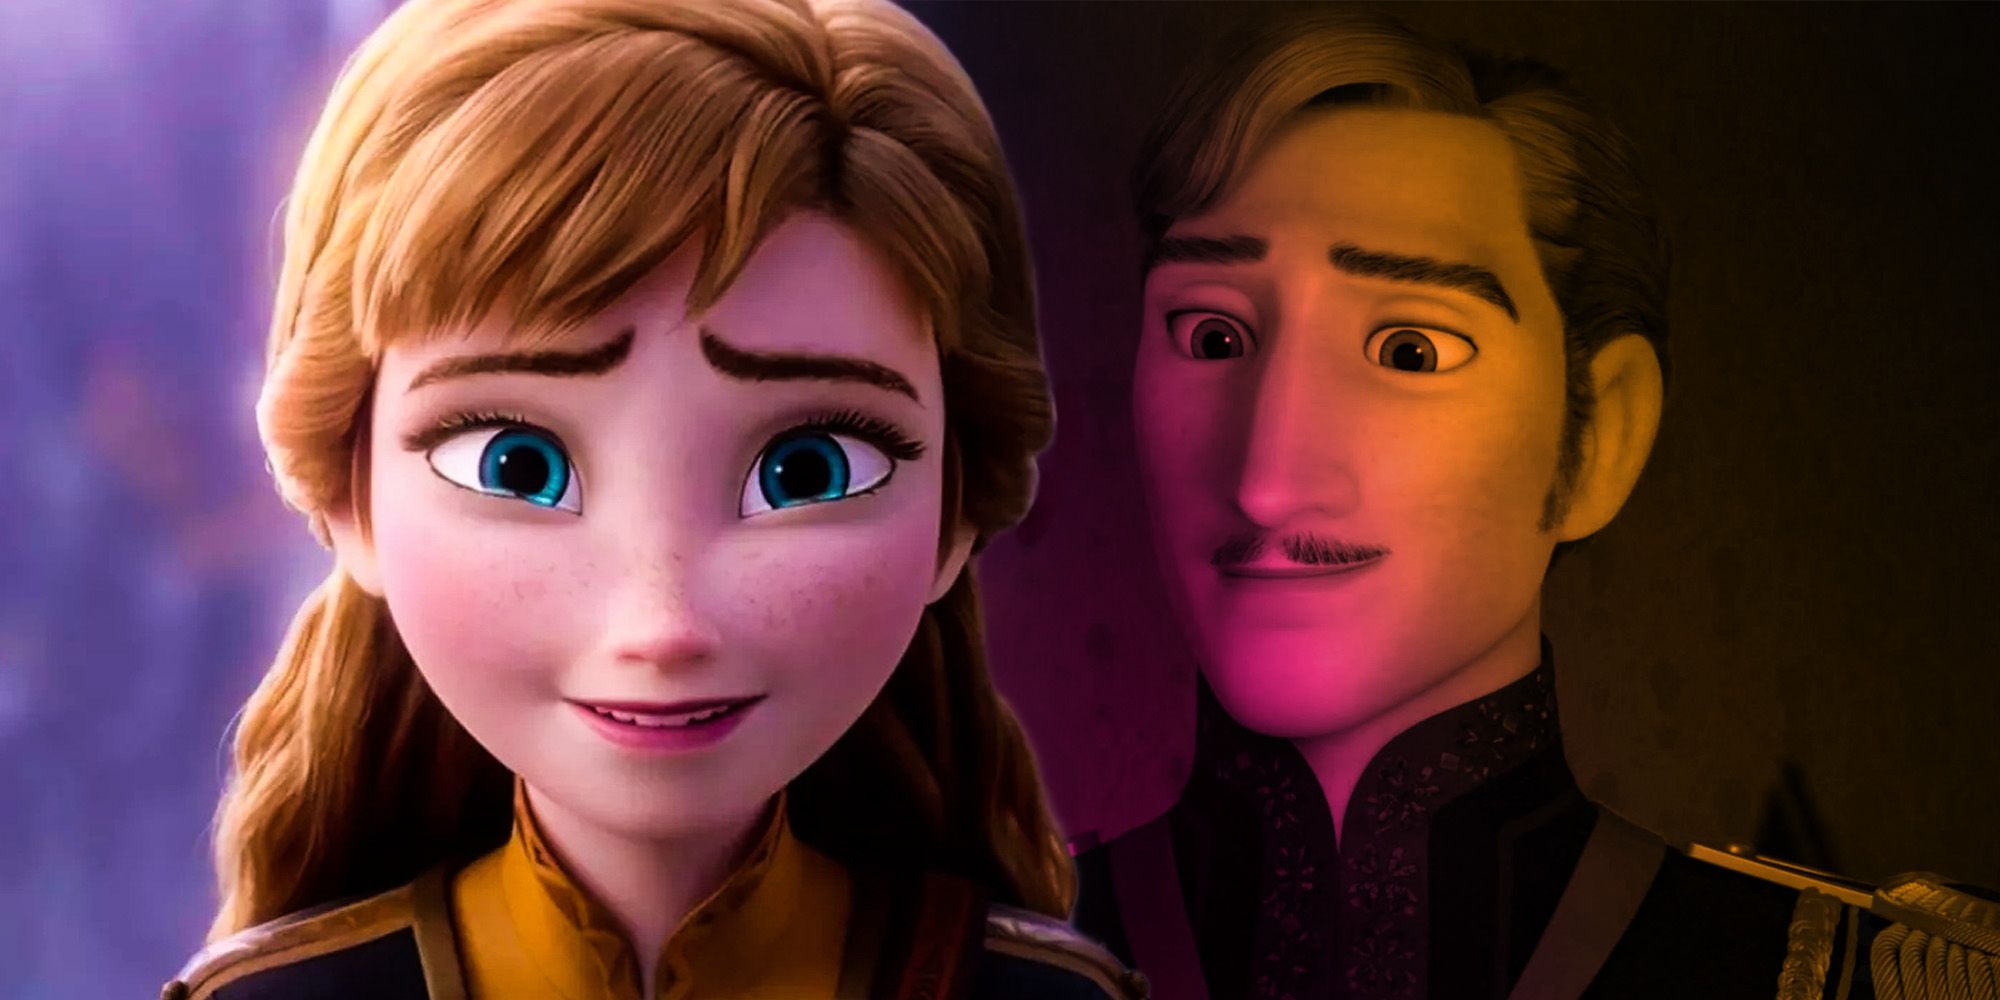 Frozen 3 Is A $1.45 Billion Dream For Disney - But It Hides A Nightmare  Reality